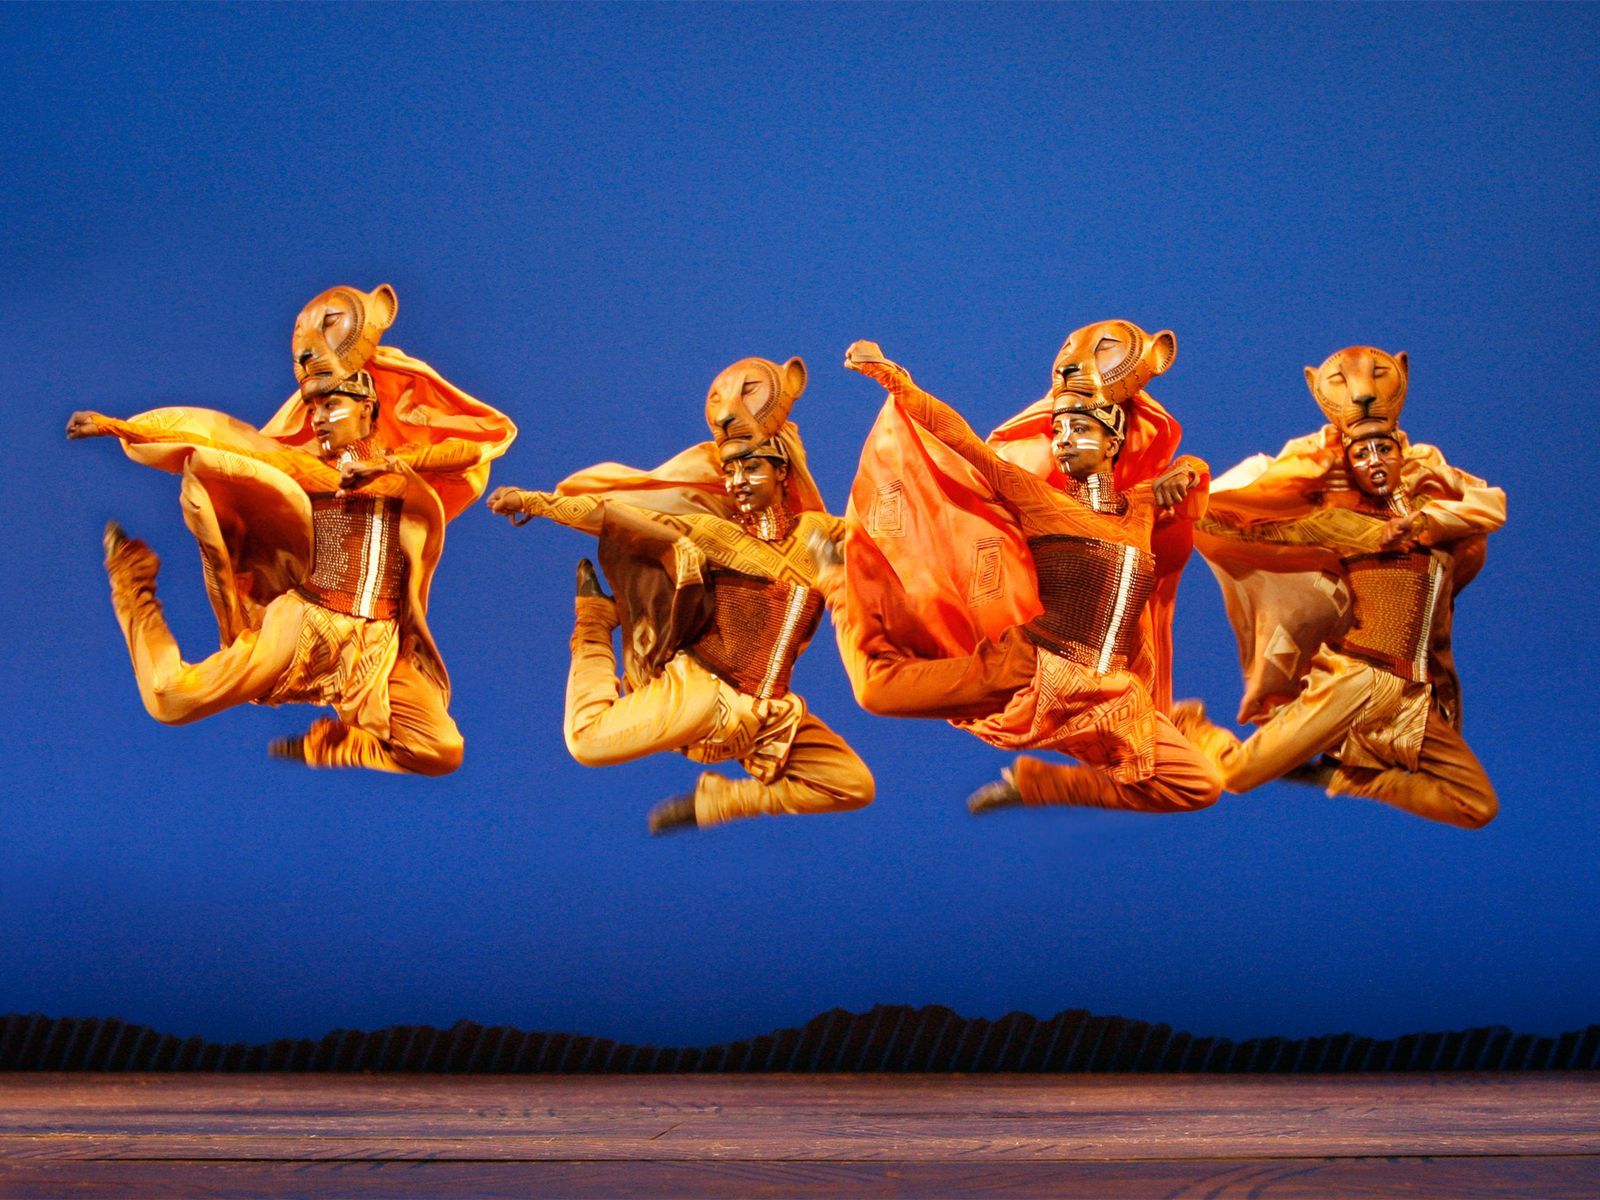 Lionesses - THE LION KING - Photo by Joan Marcus.jpg